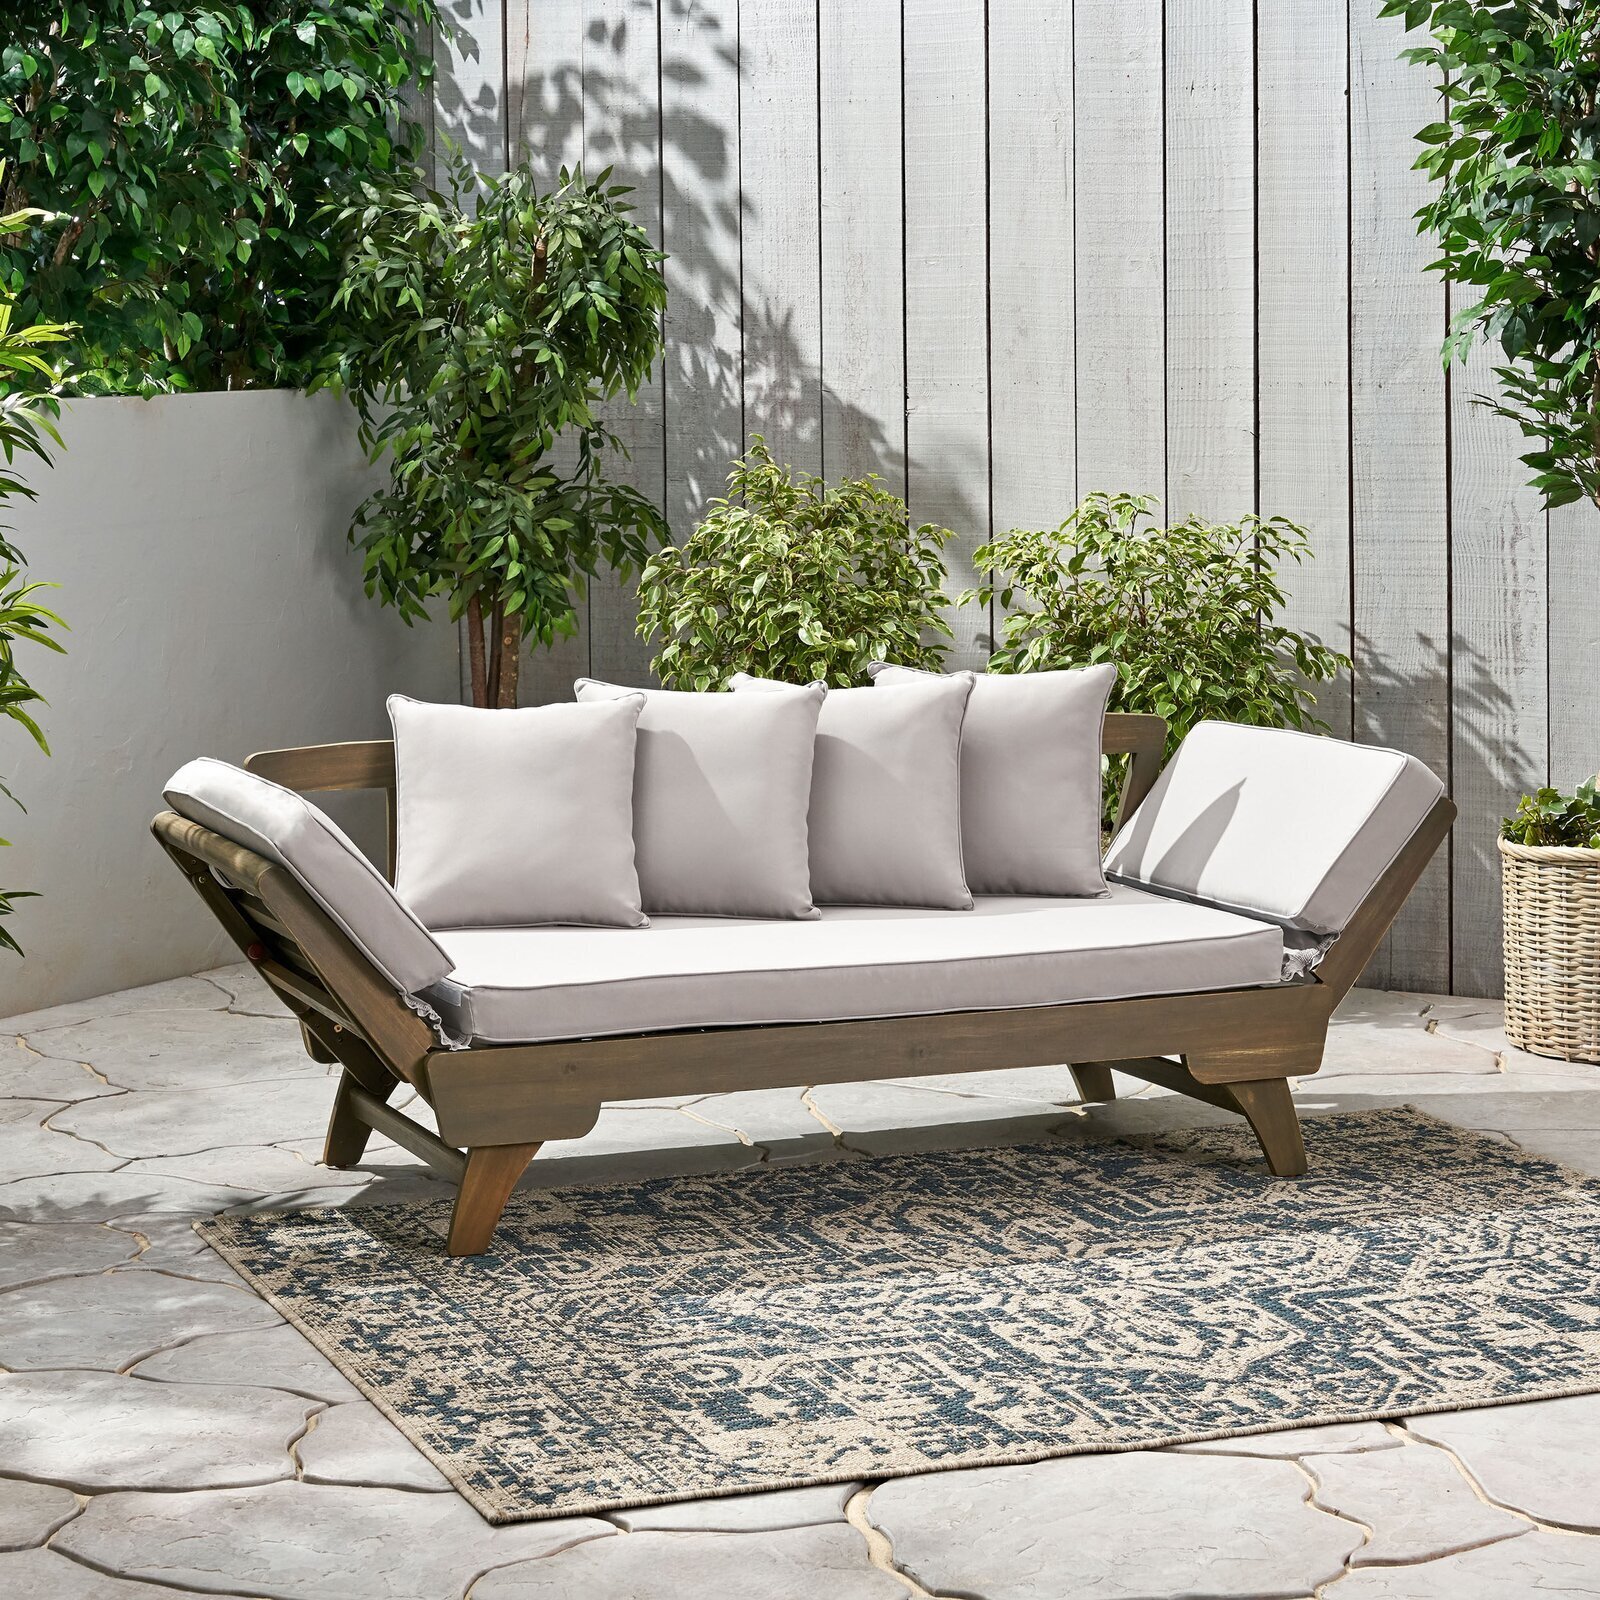 Outdoor day bed solid wood